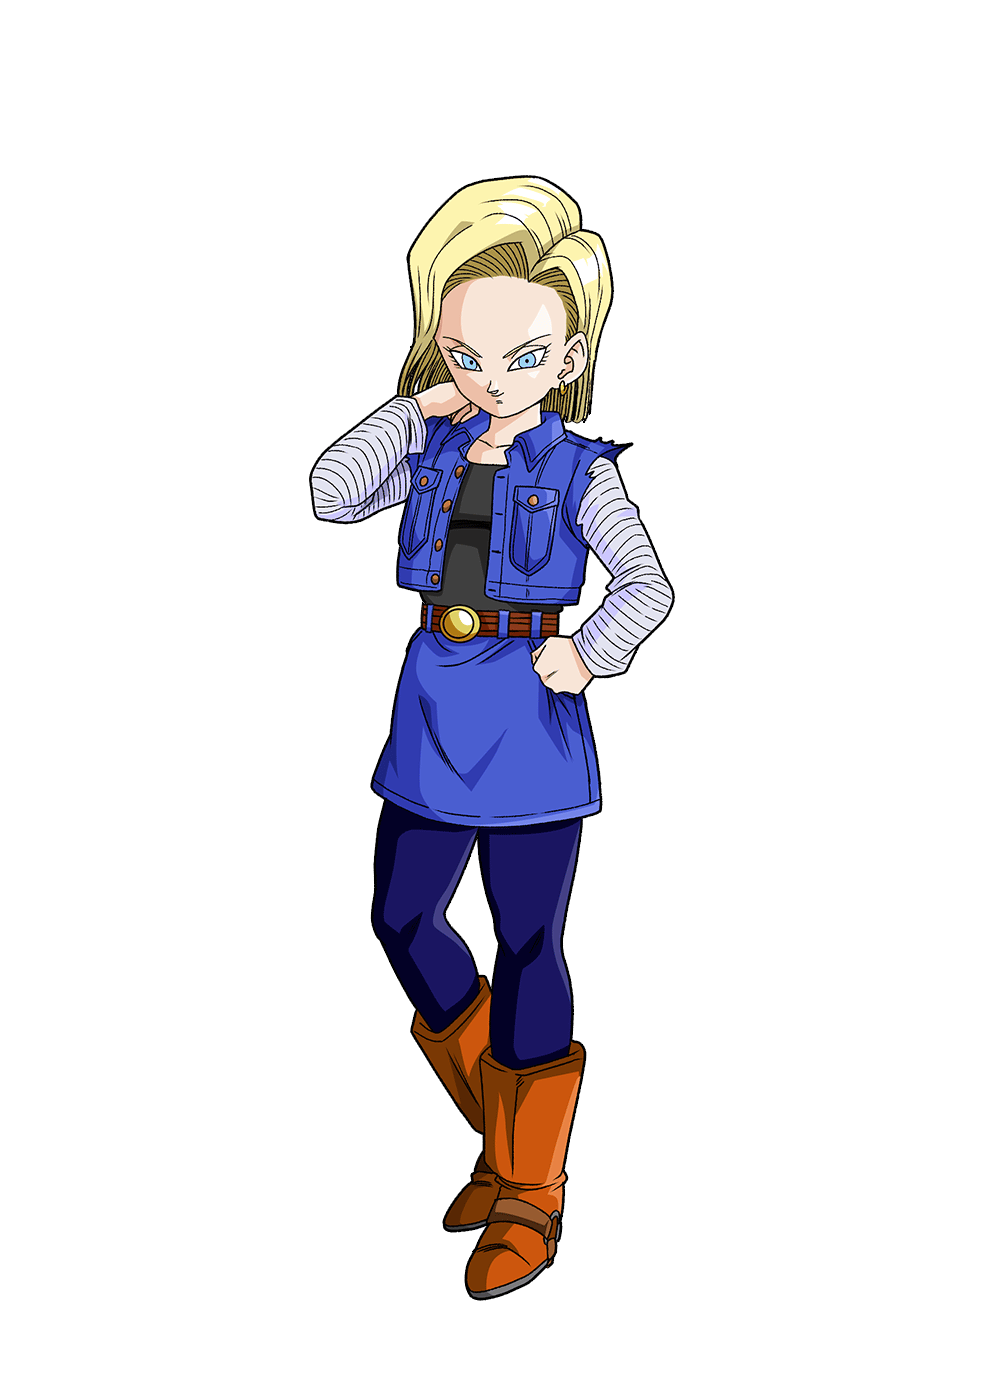 Android 19 render 4 by Maxiuchiha22 on DeviantArt